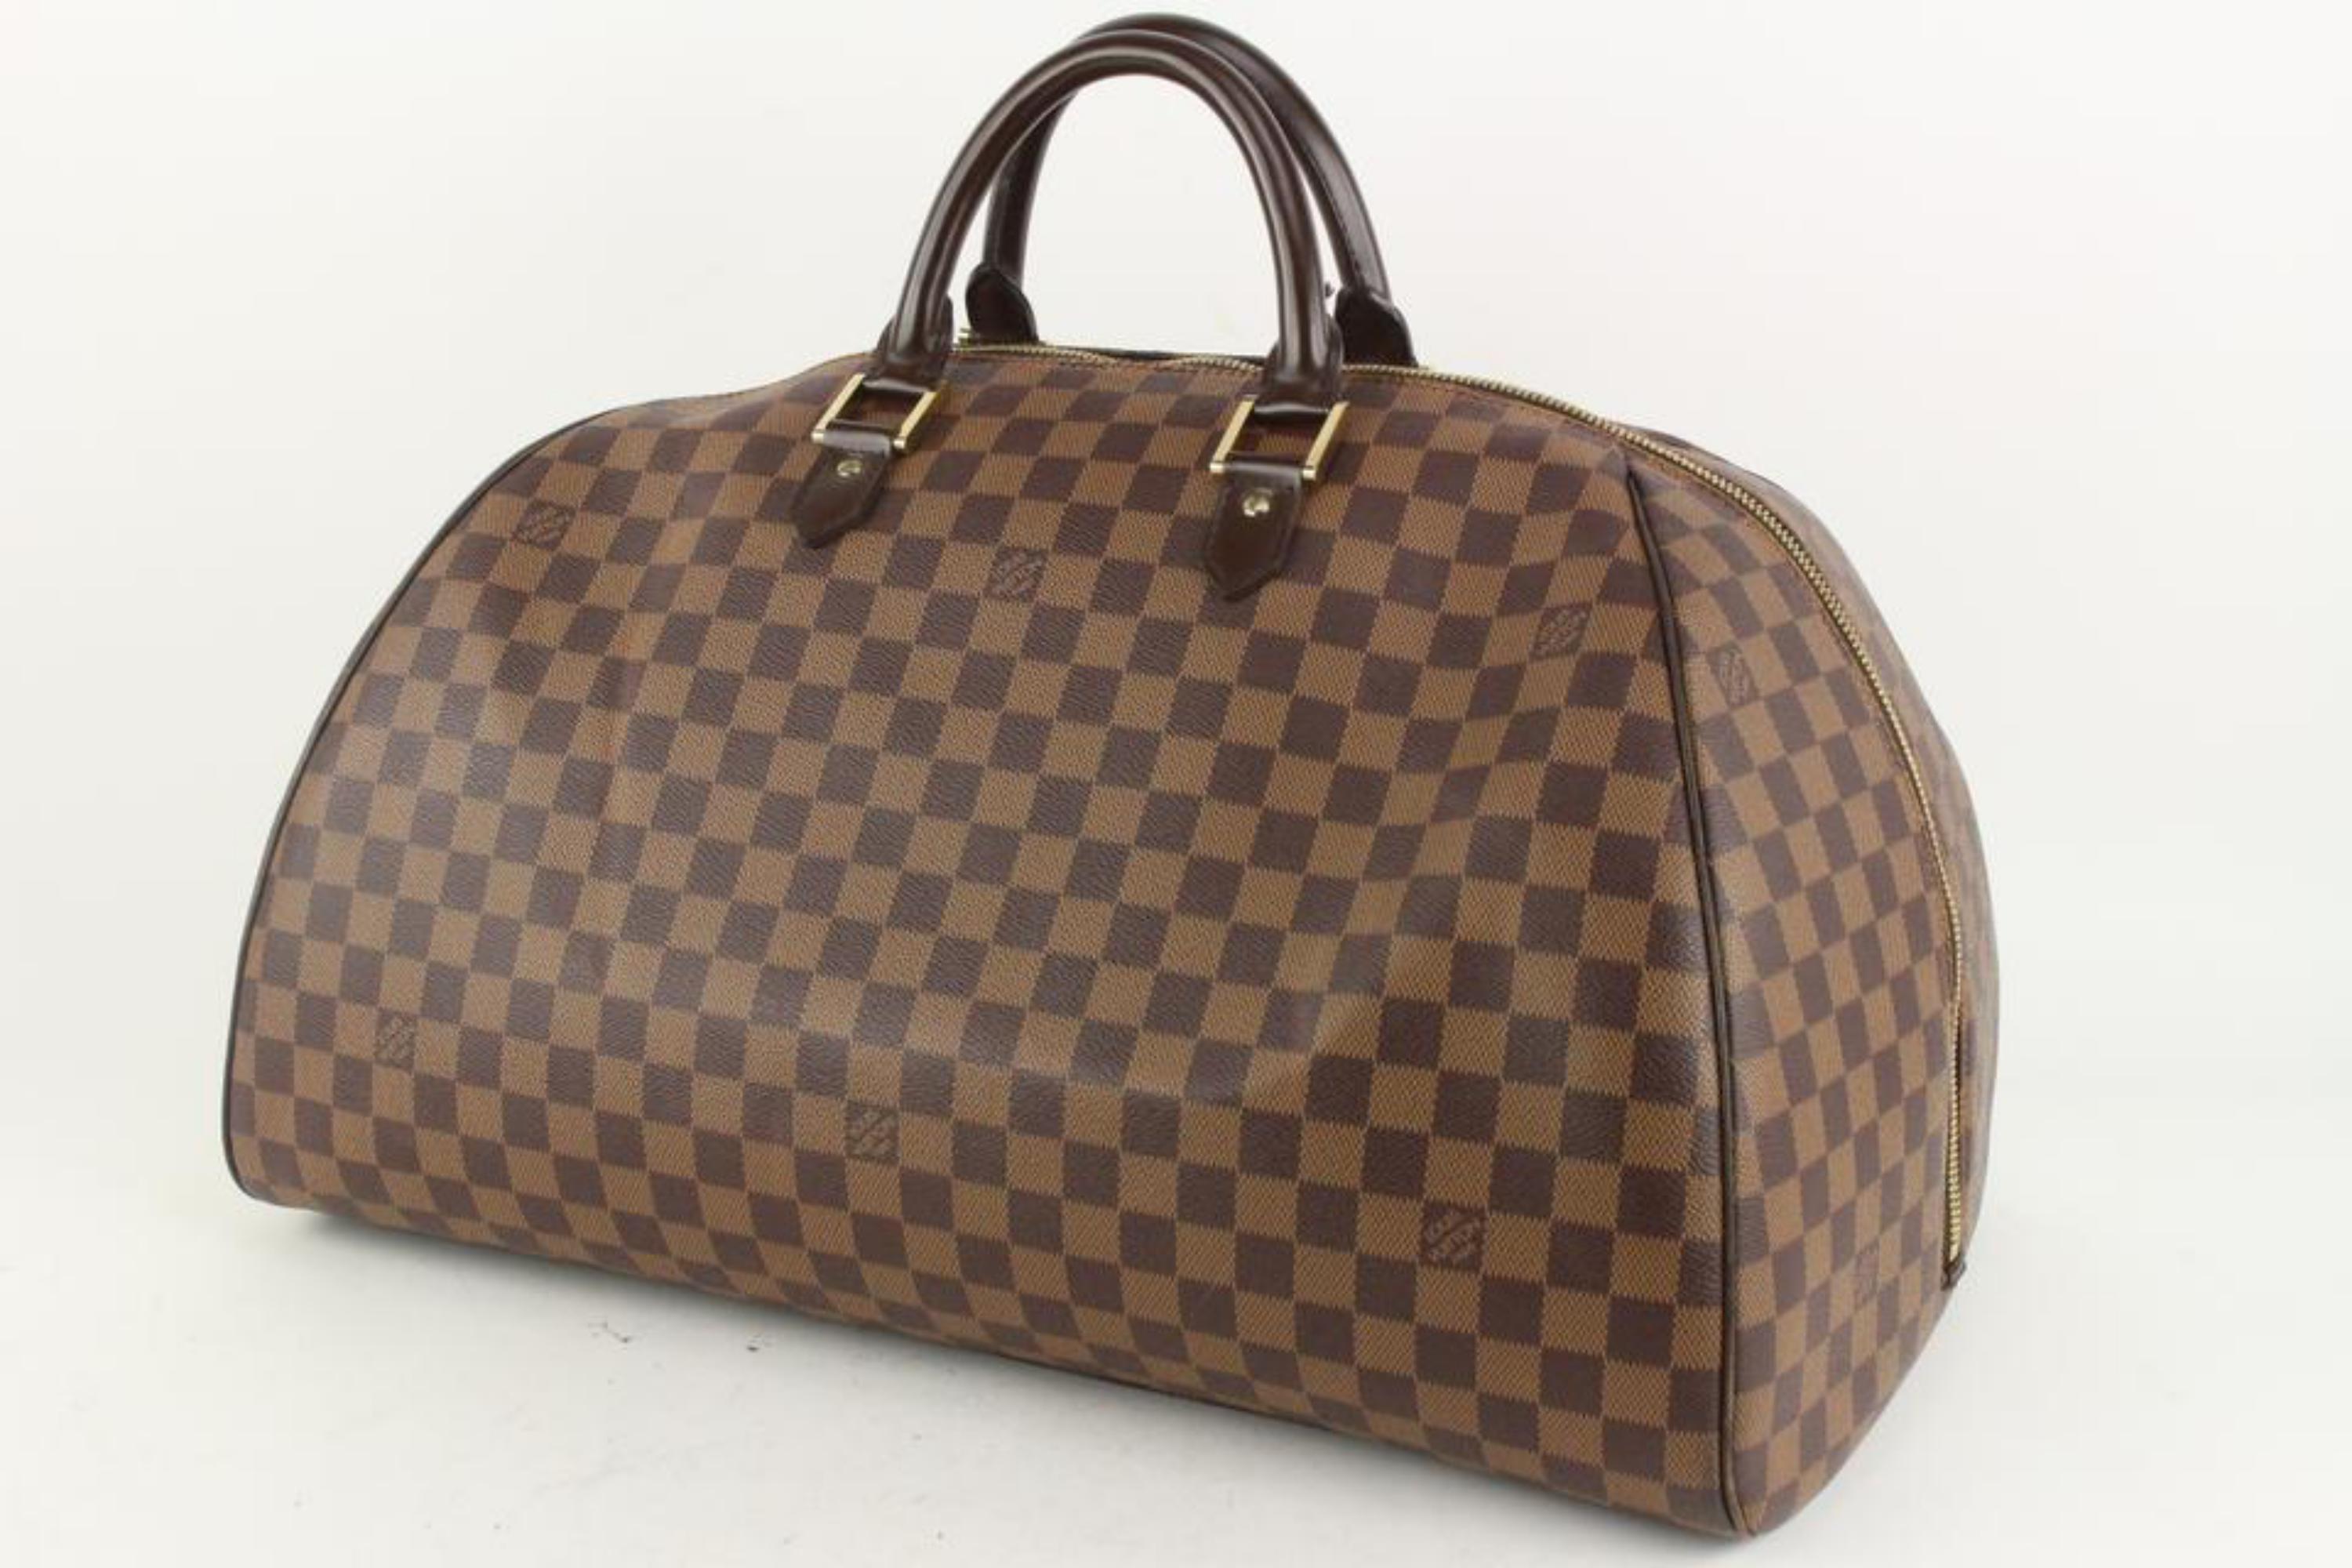 Louis Vuitton Damier Ebene Ribera GM Weekend Travel Keepall Upycle Ready 1419Va
Date Code/Serial Number: AR0051
Made In: France
Measurements: Length: 19 